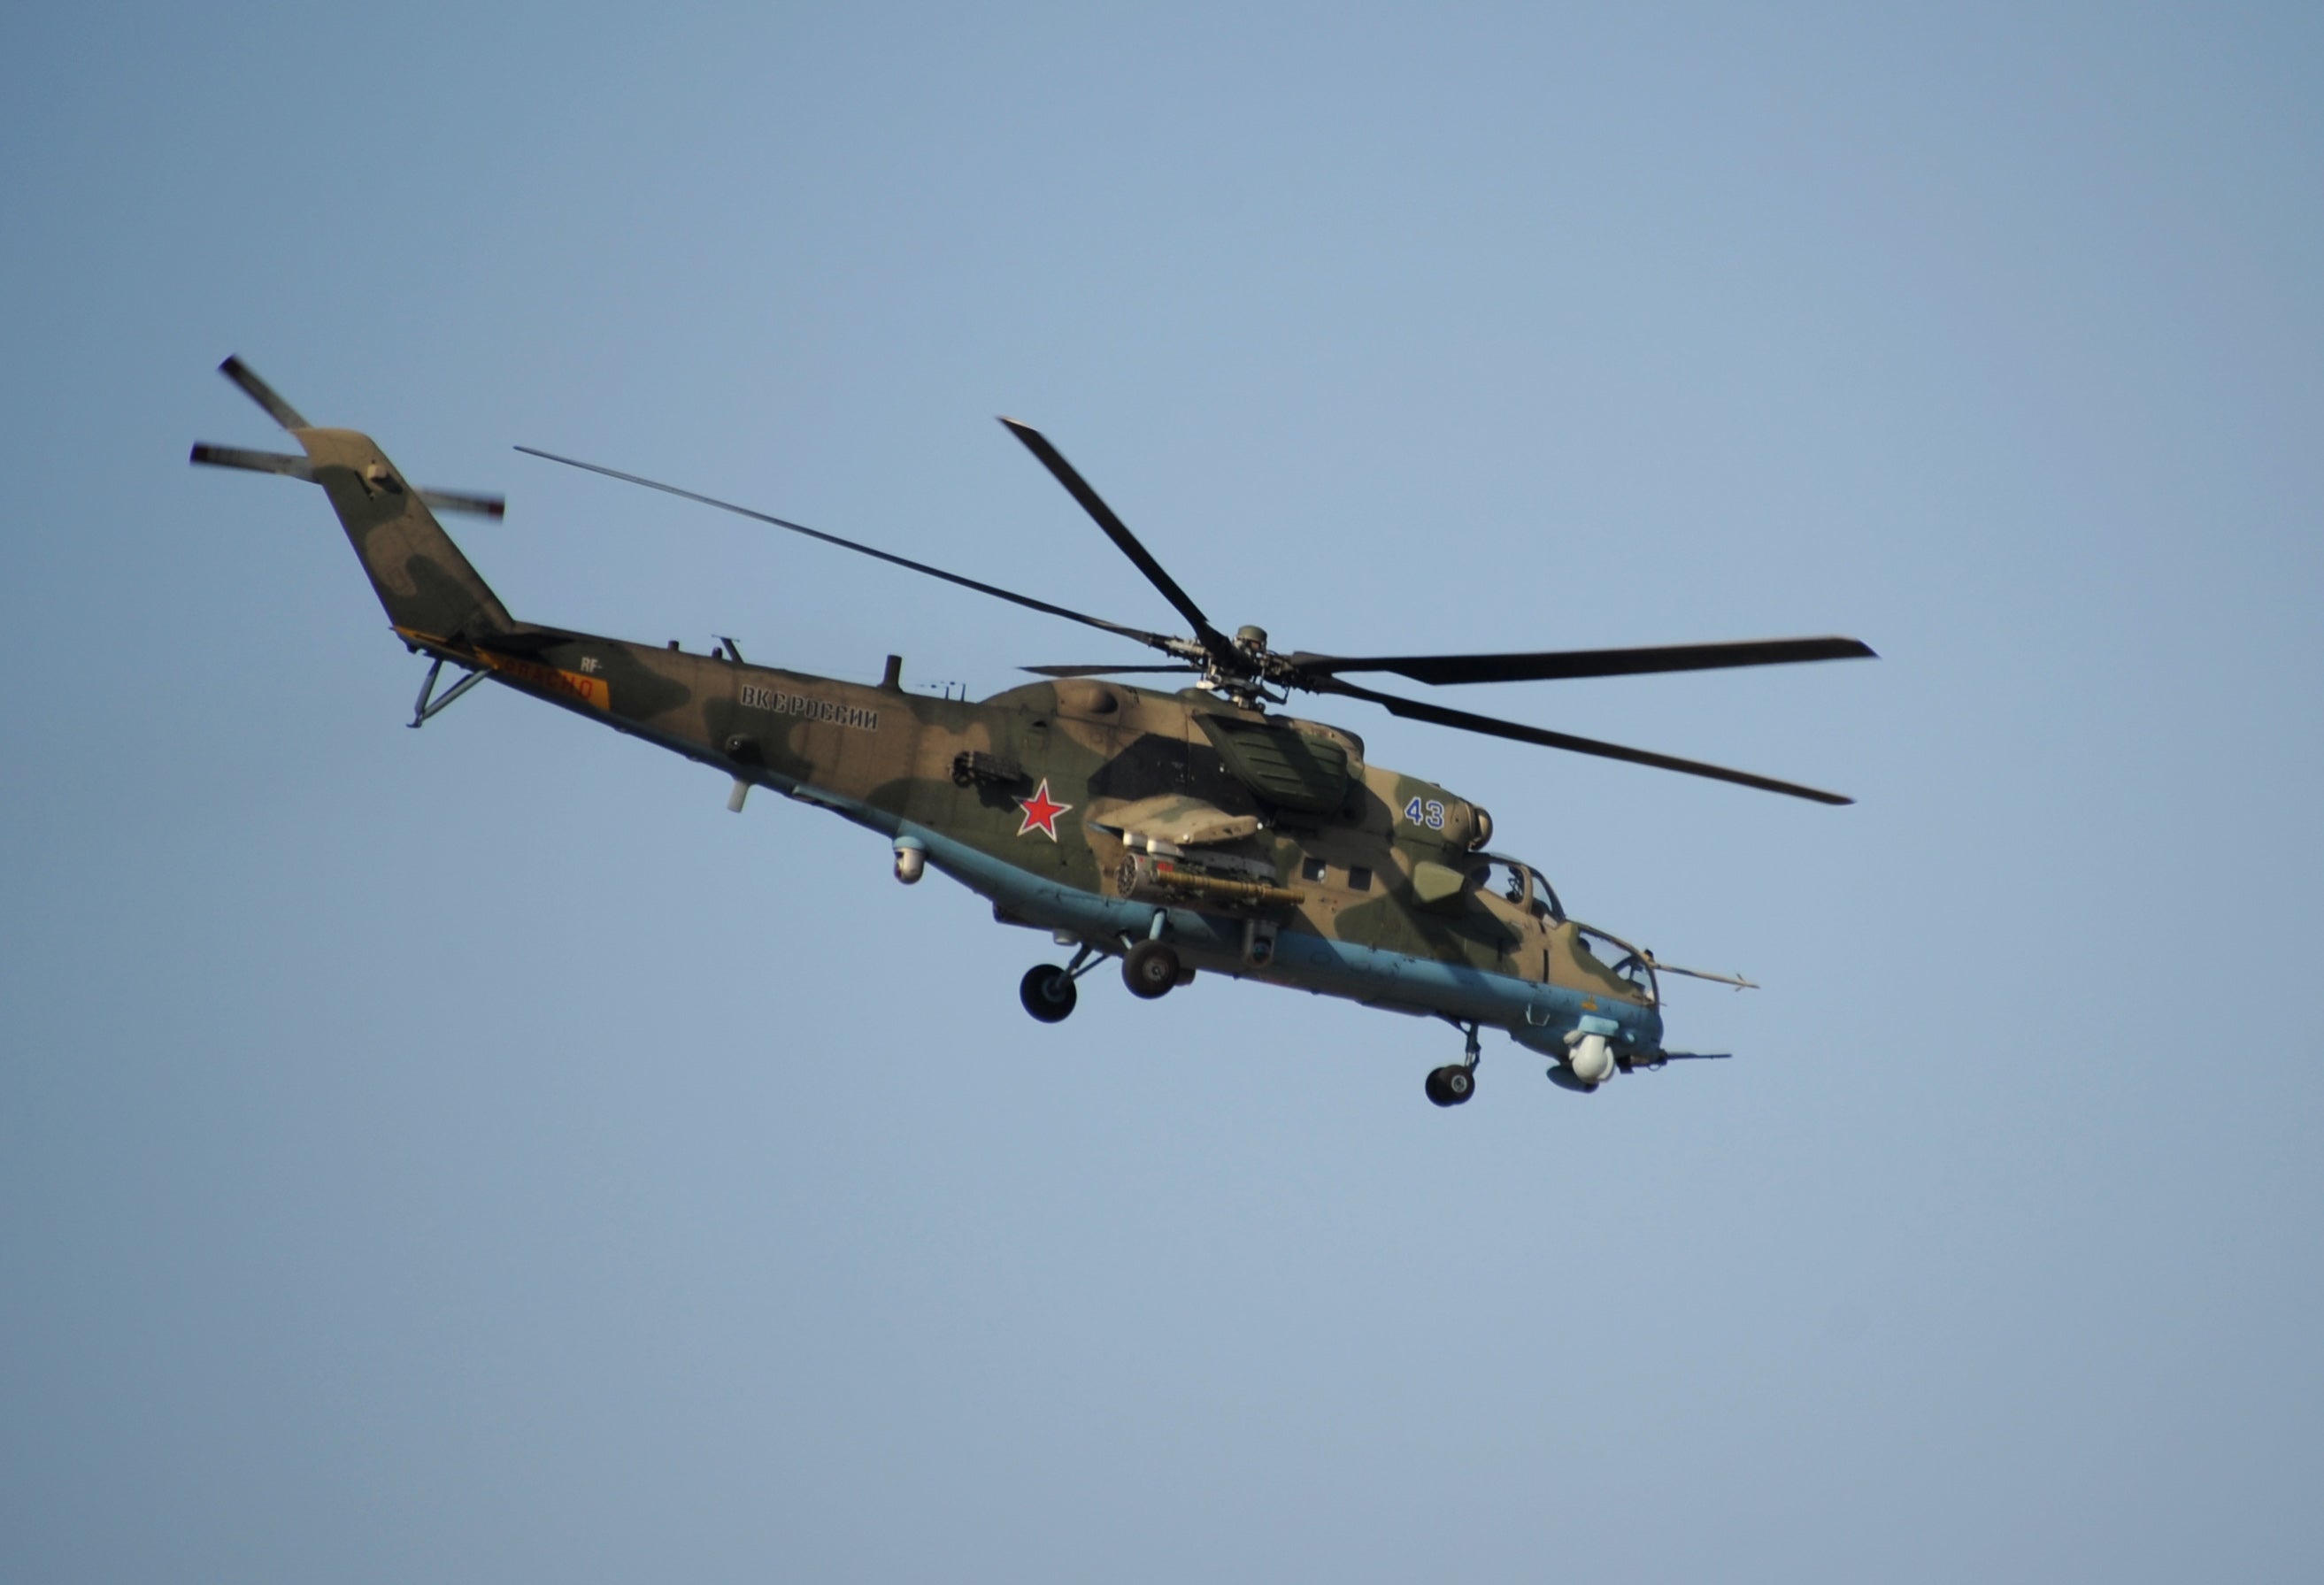 Azerbaijan admitted it was responsible for the downing of the Mi-24 helicopter